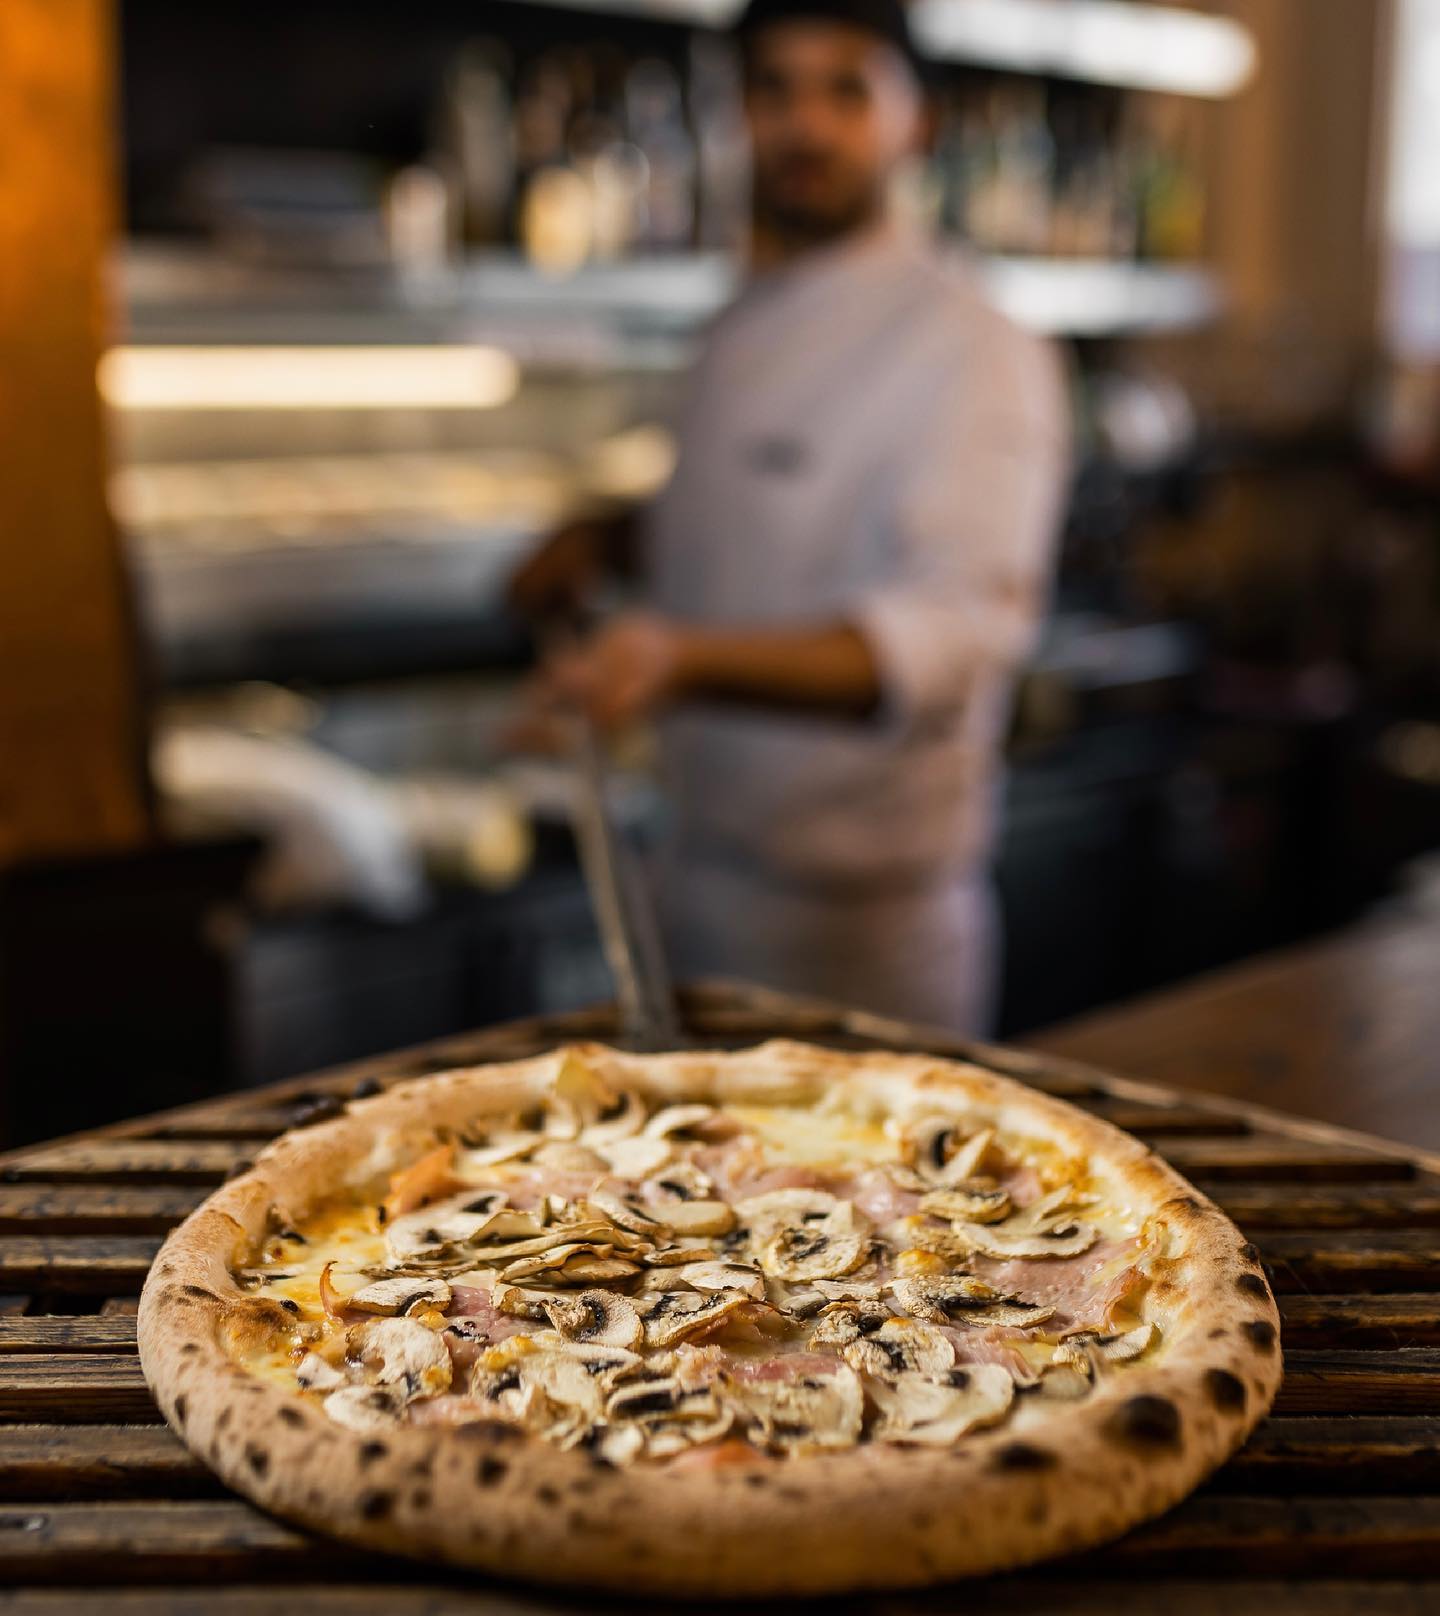 Have a slice of our 𝐏𝐢𝐳𝐳𝐚 𝐩𝐫𝐨𝐬𝐜𝐢𝐮𝐭𝐭𝐨 𝐄 𝐅𝐮𝐧𝐠𝐡𝐢, it’s tempting, simple and tasty.